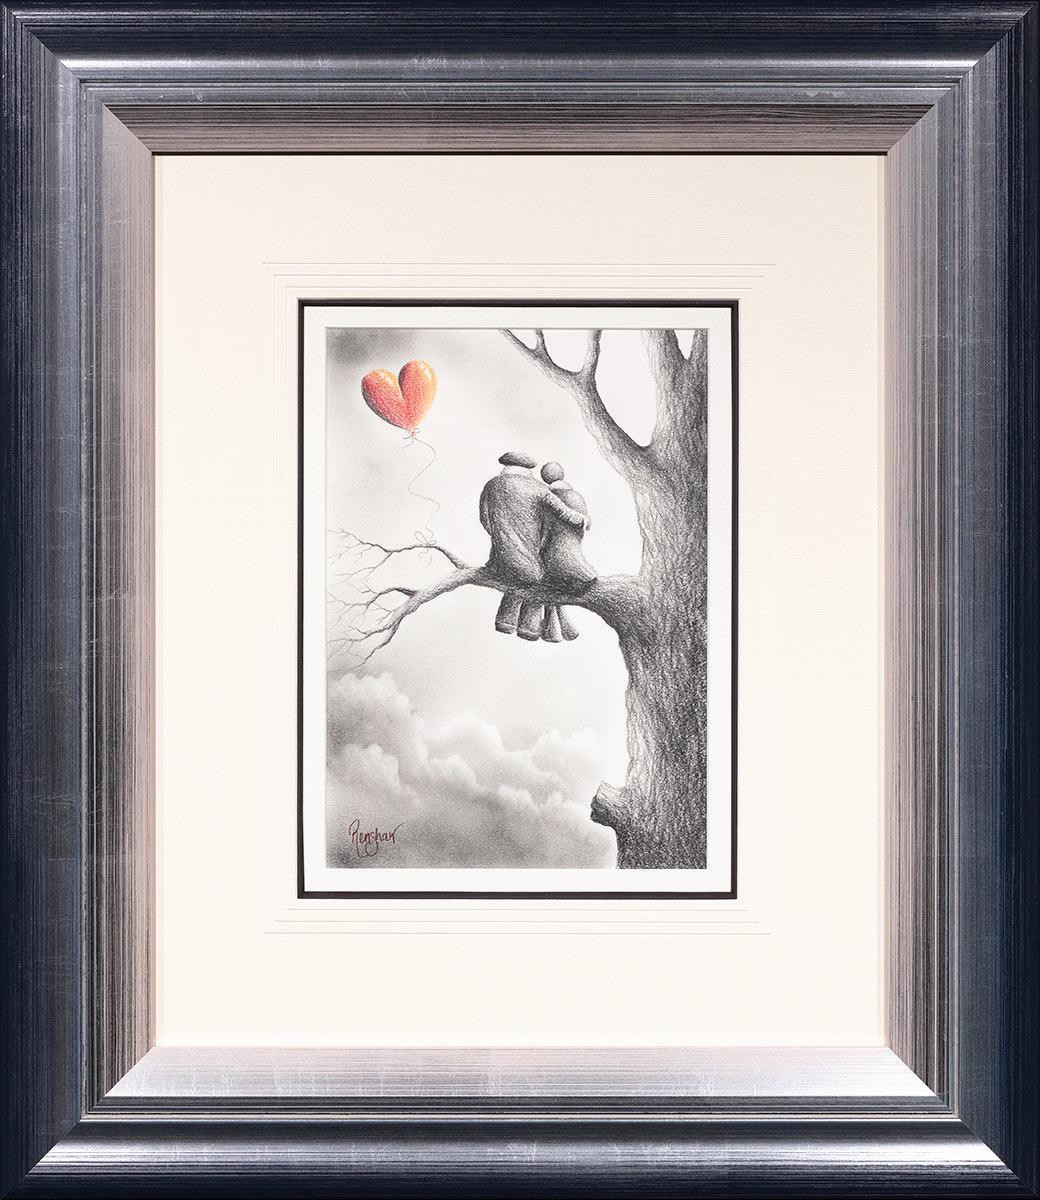 Up In The Clouds - Sketch David Renshaw Framed